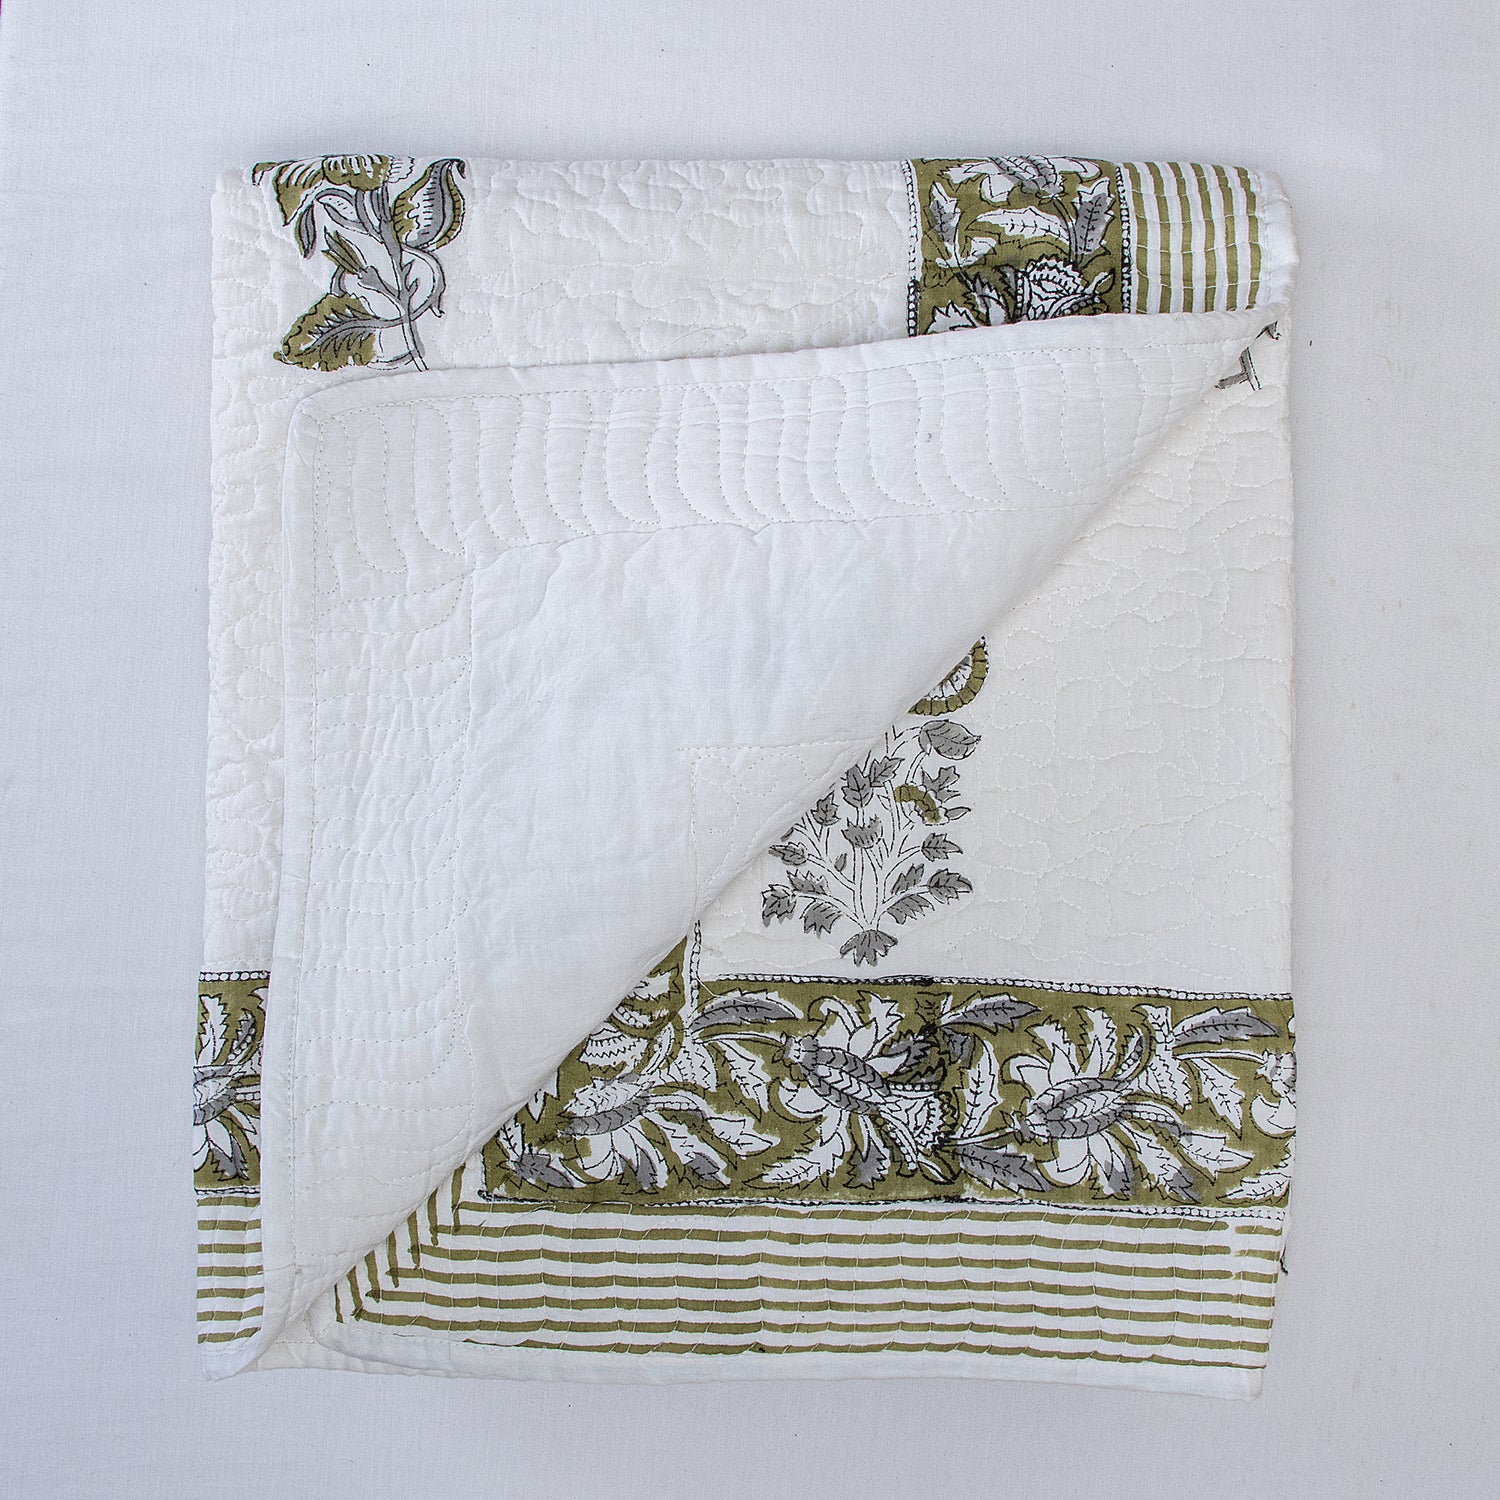 Green Floral Print Cotton Comfort Pure Baby Blanket